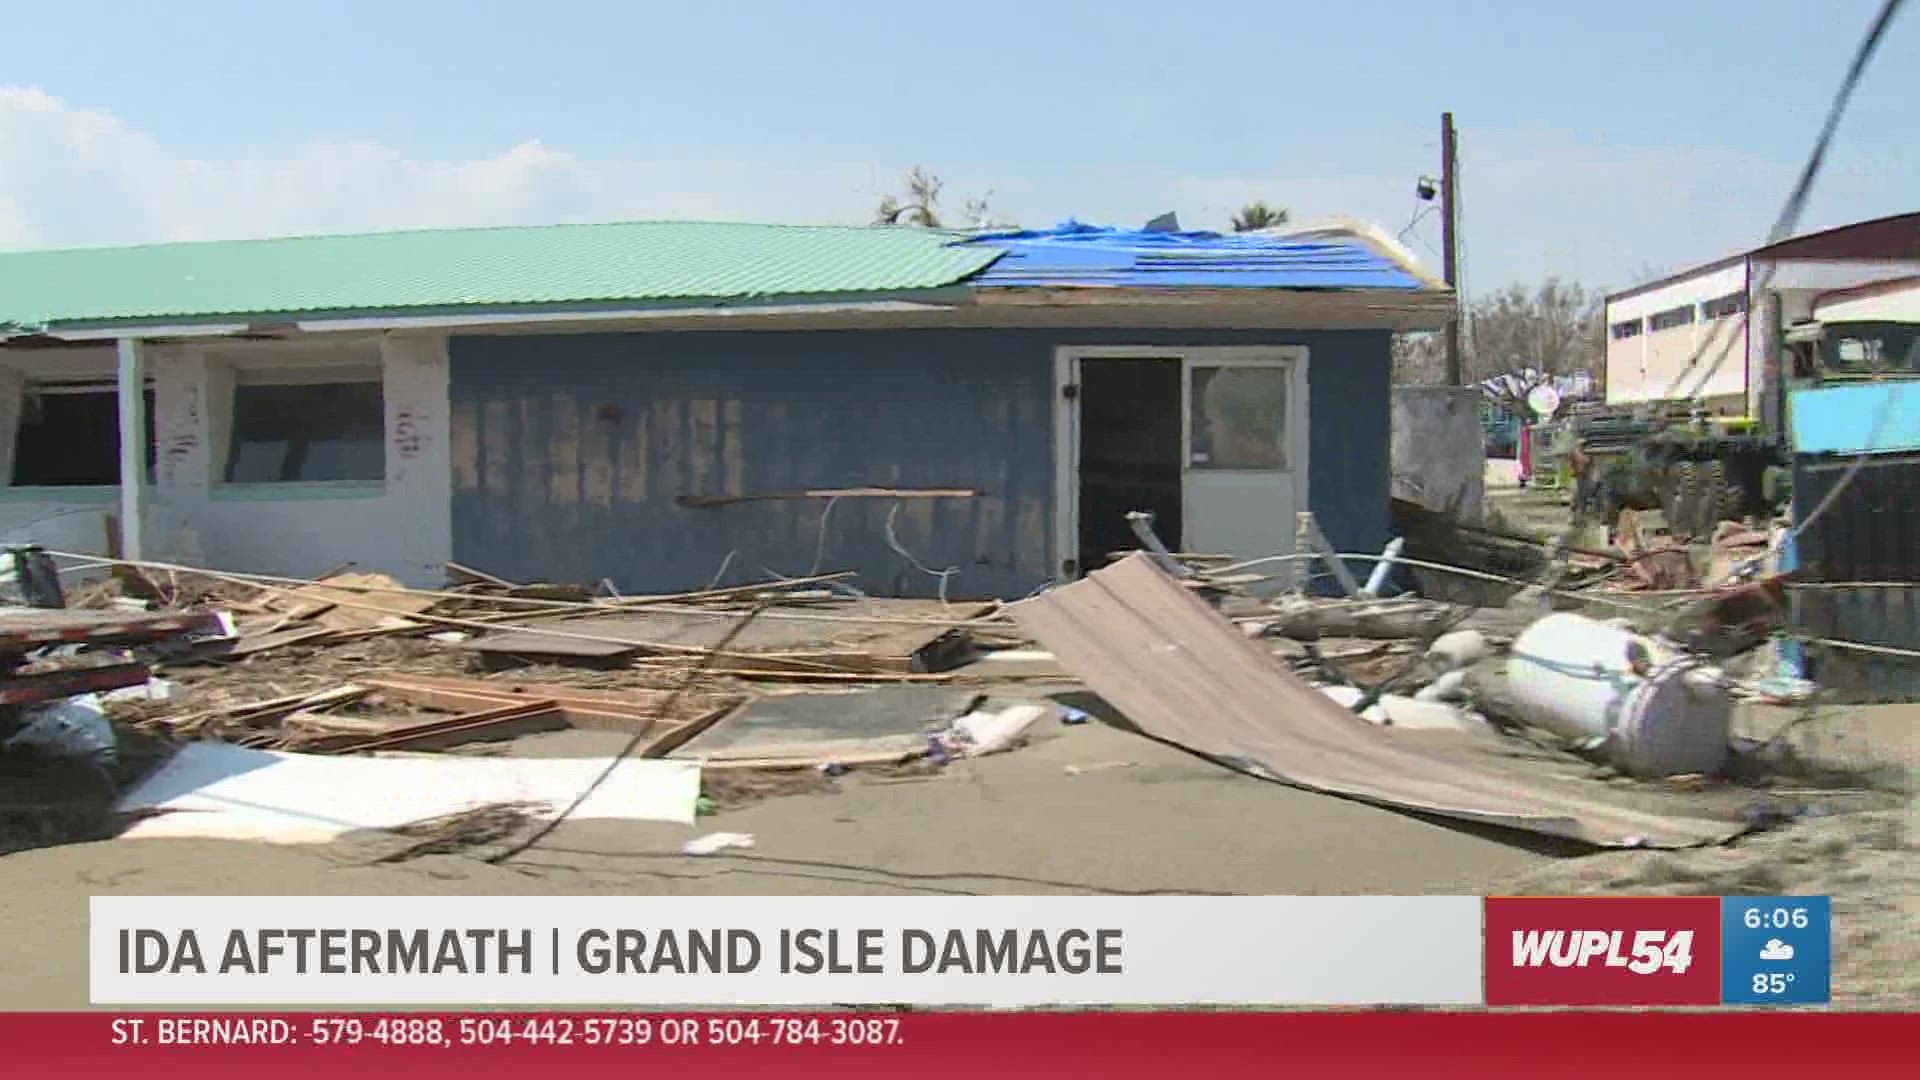 It's estimated 40% of structures were completely destroyed and another 40% of remaining structures must be demolished in Grand Isle.